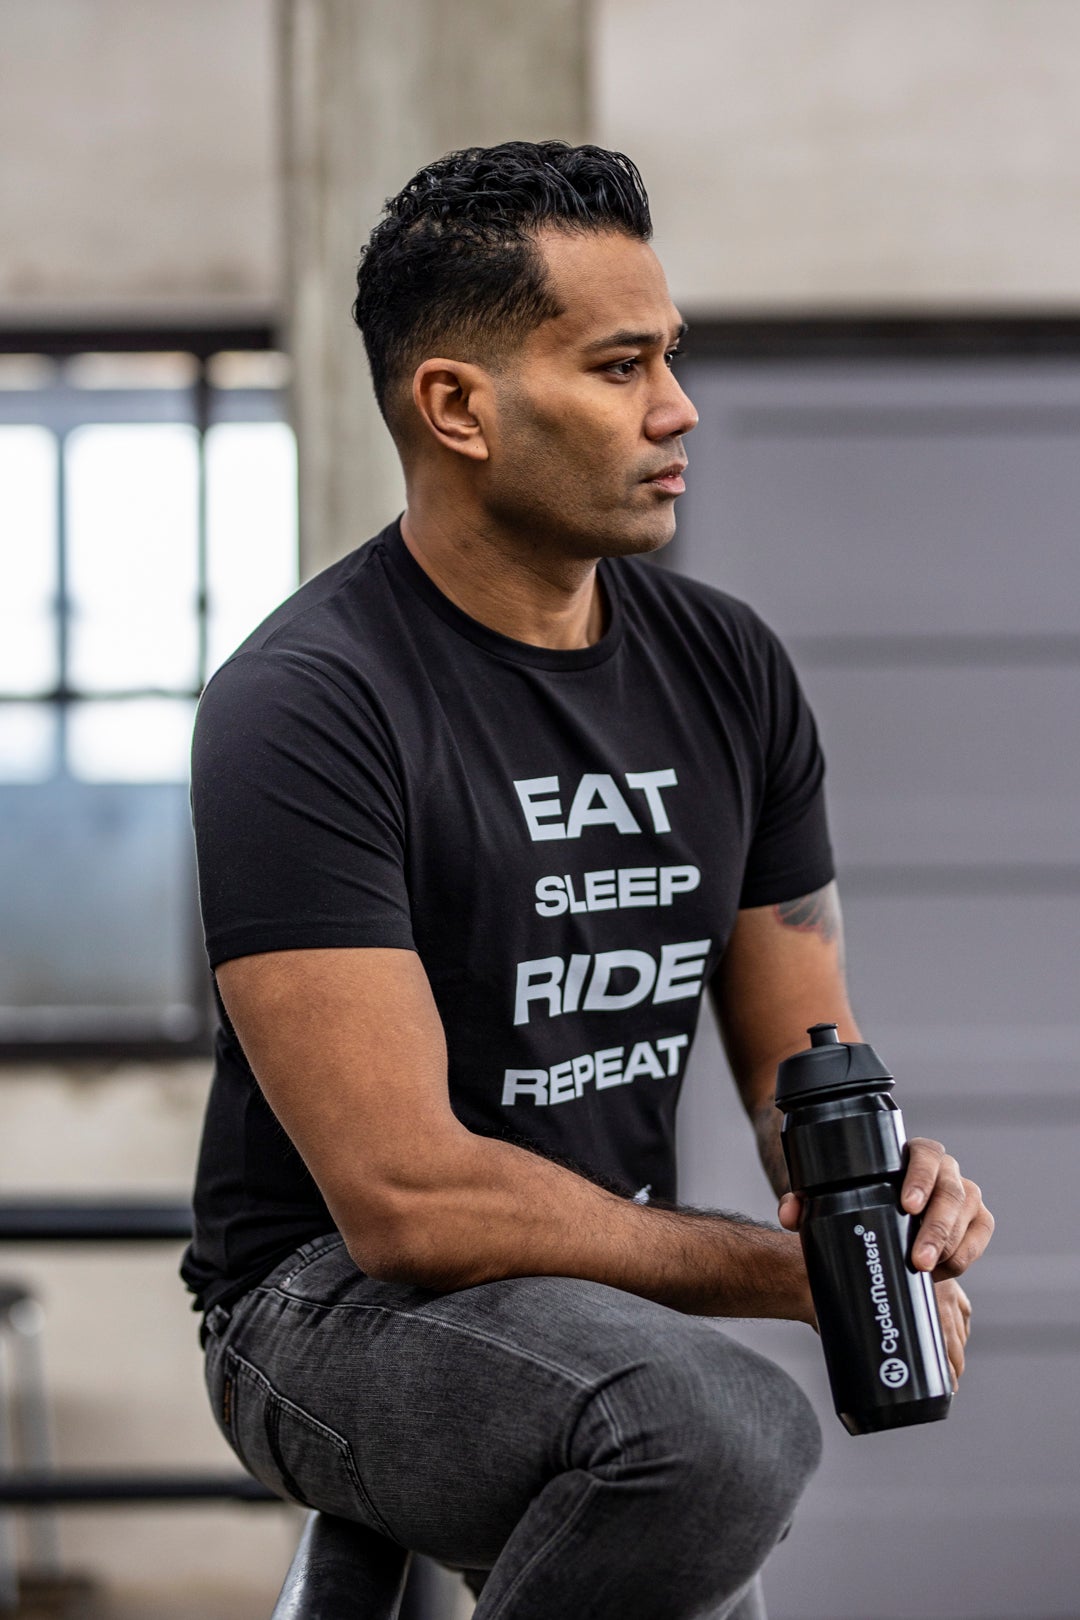 A man wears a black CycleMasters t-shirt and water bottle